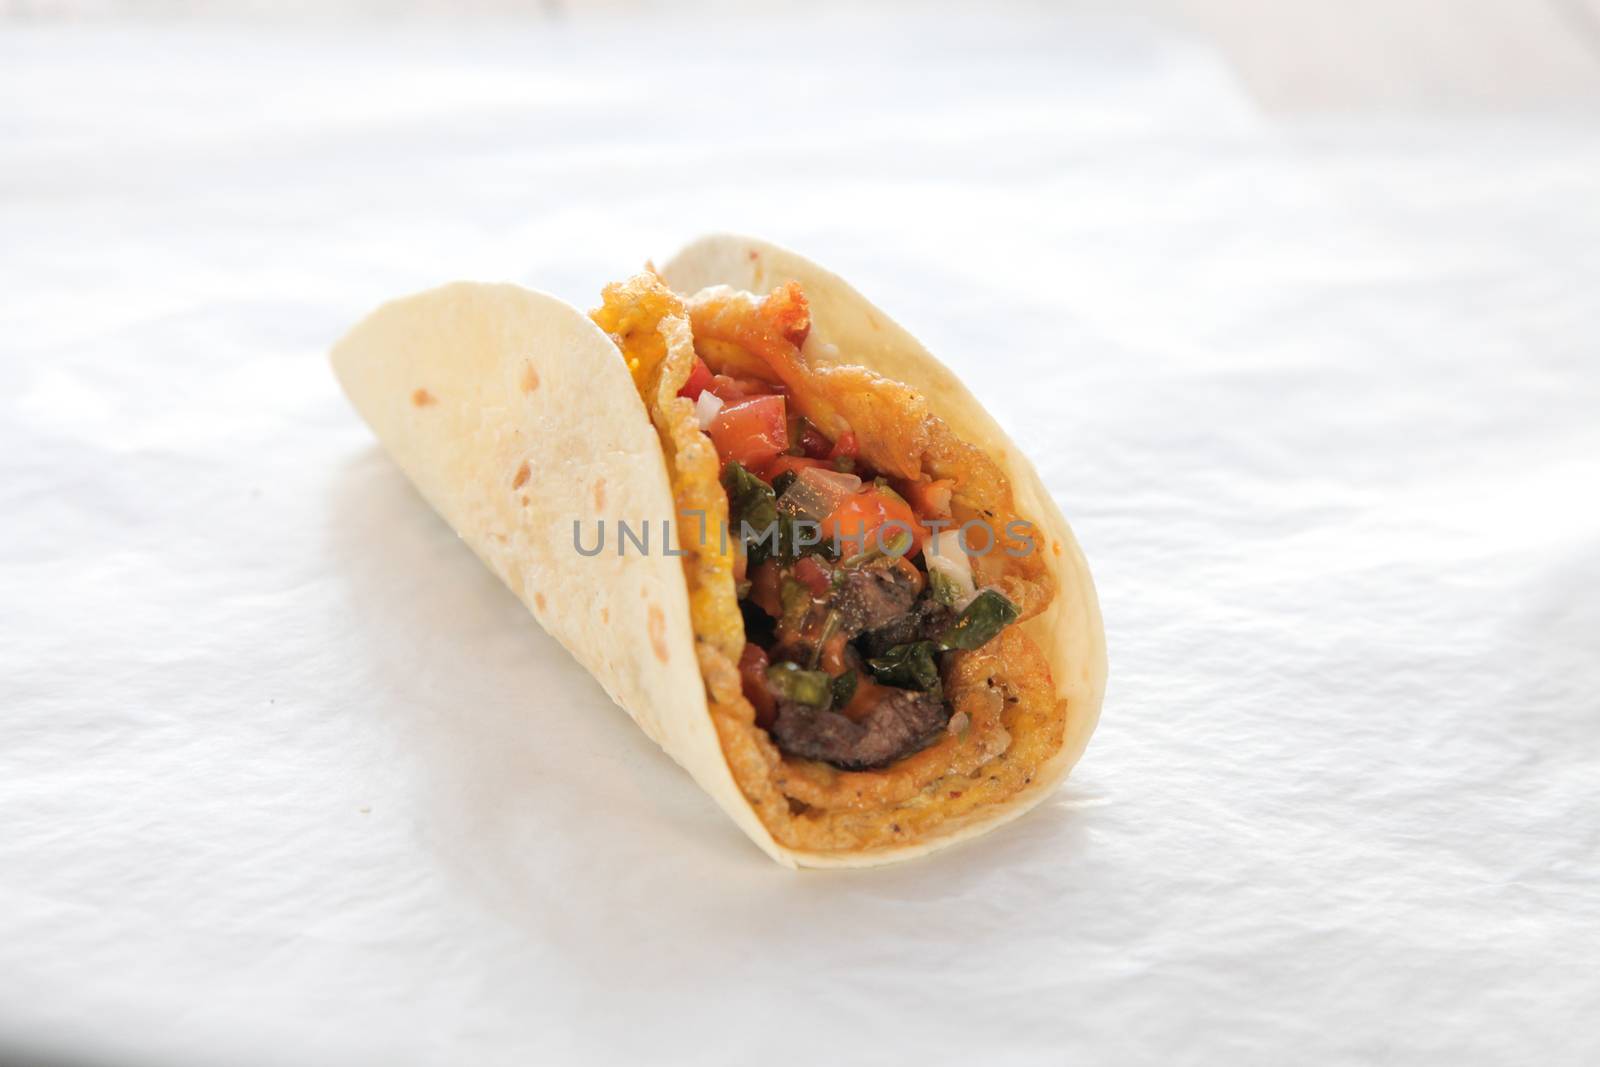 Beef and egg omelette tacos by haiderazim